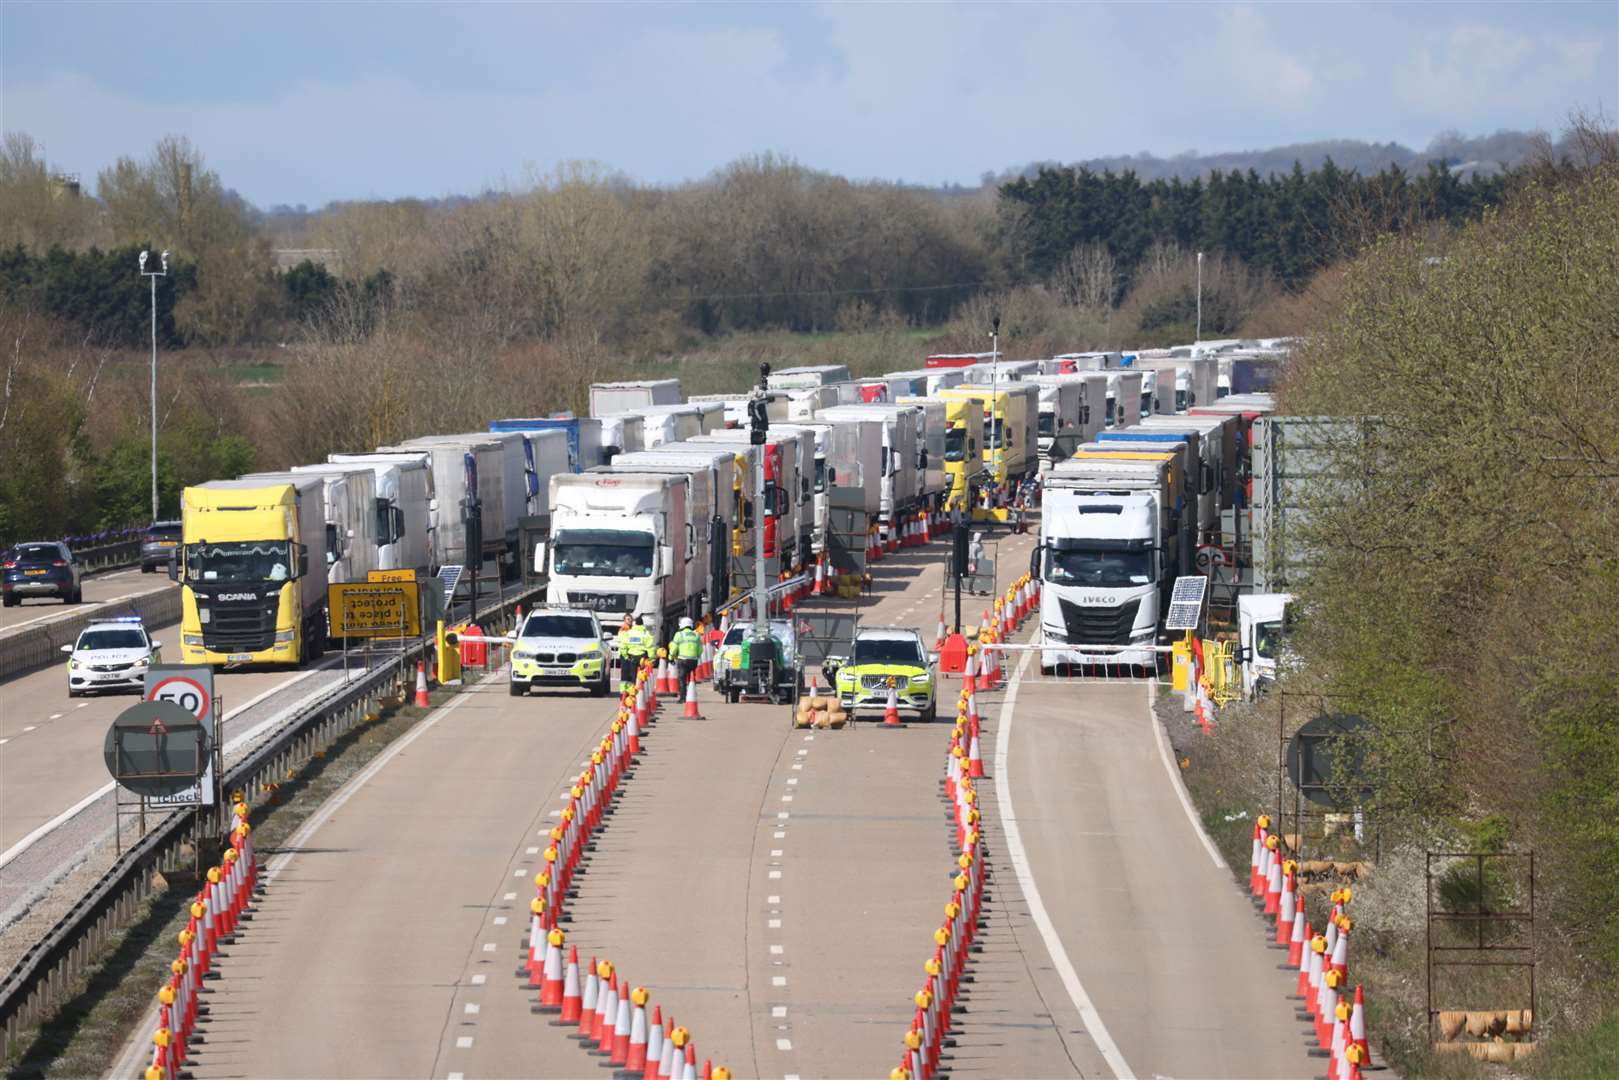 HGV drivers were stuck in queues on the M20 last weekend